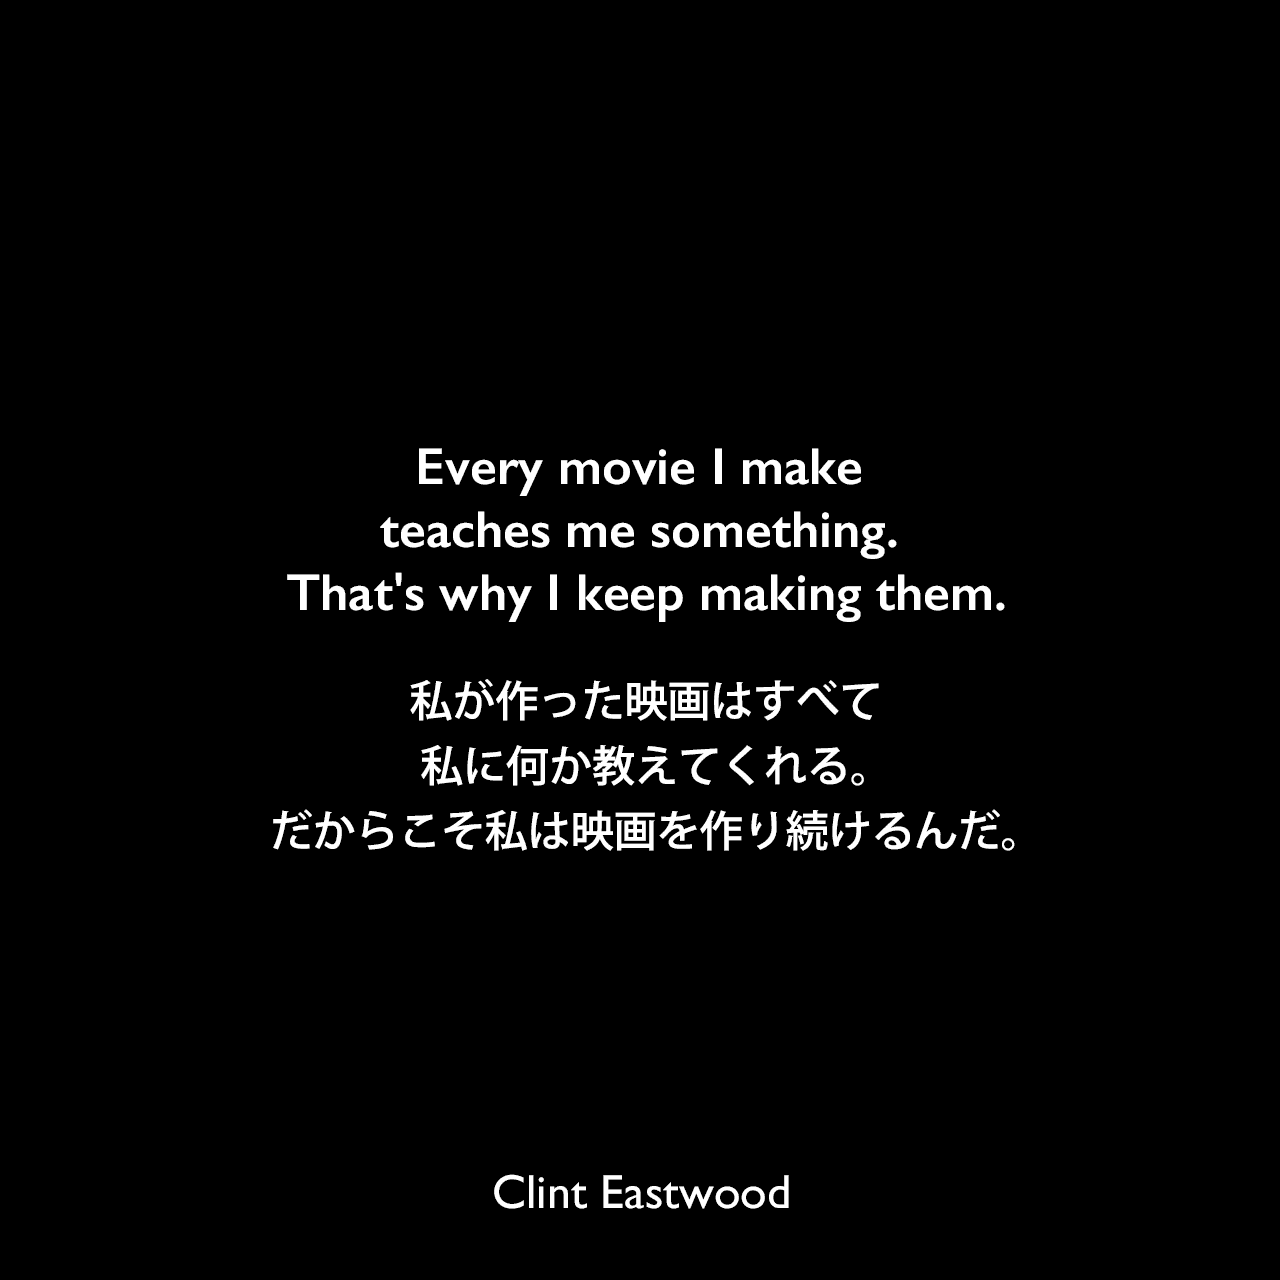 Every movie I make teaches me something. That's why I keep making them.私が作った映画はすべて私に何か教えてくれる。だからこそ私は映画を作り続けるんだ。Clint Eastwood